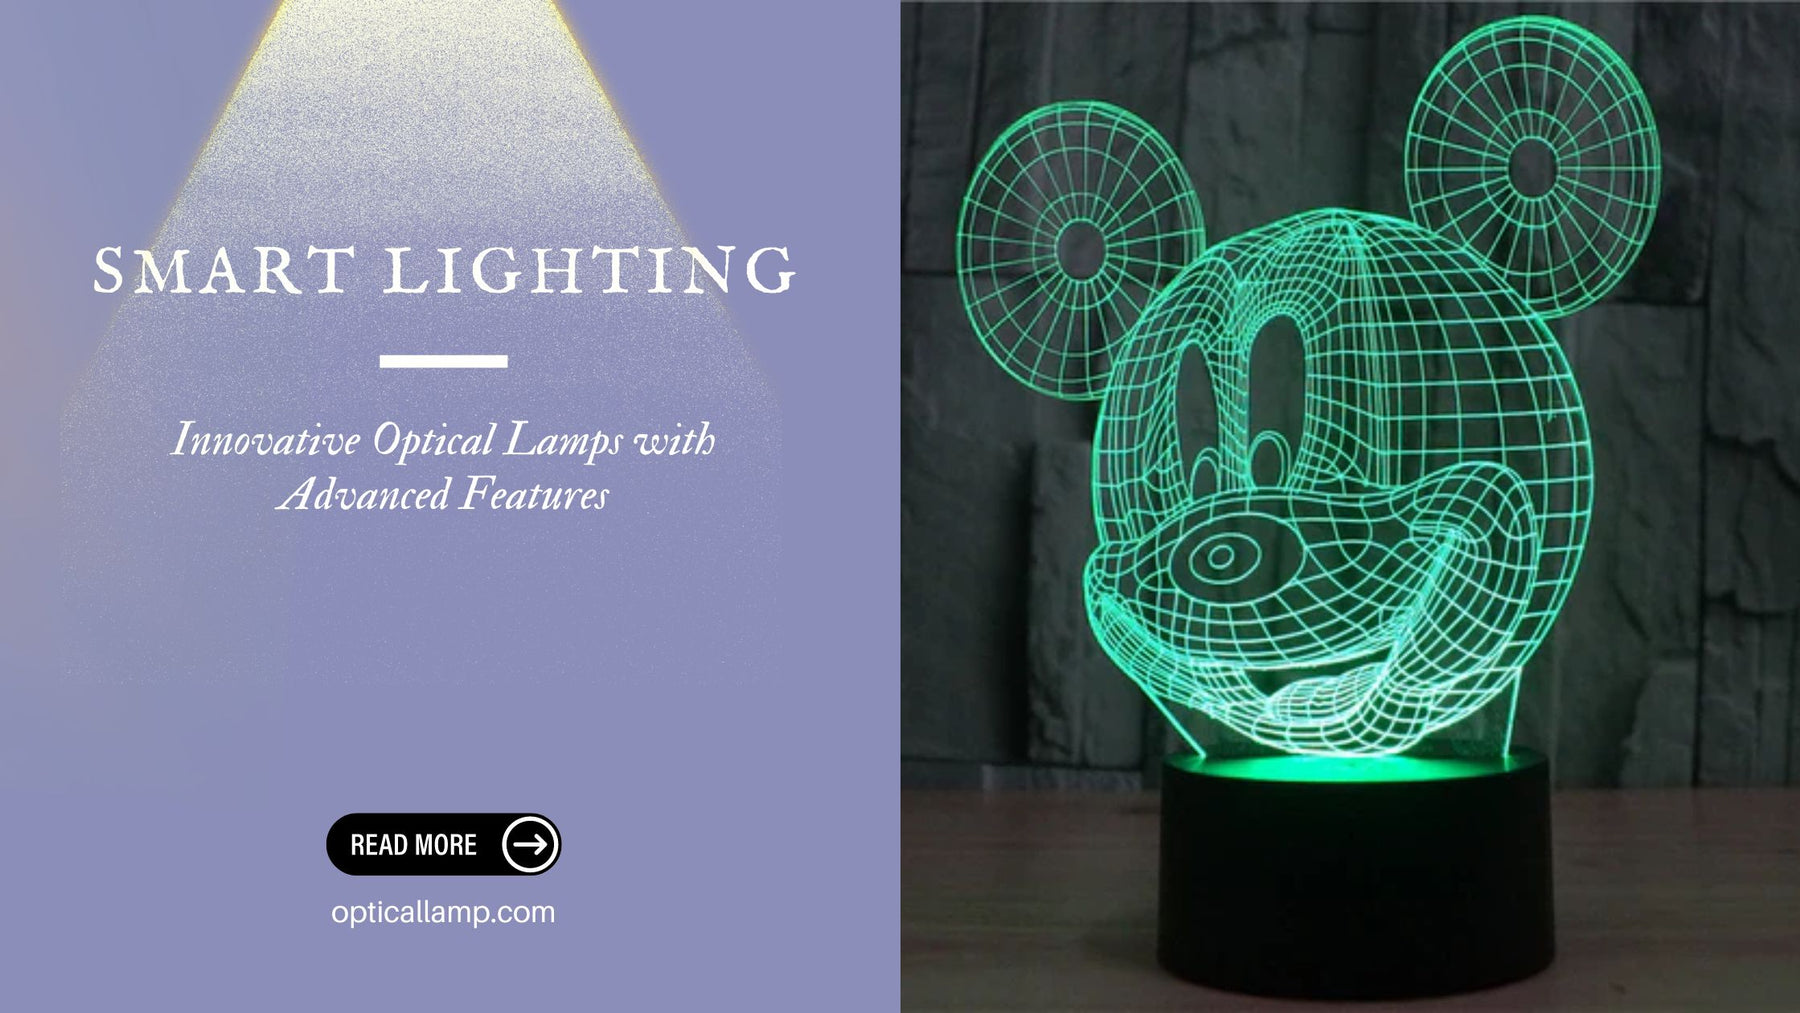 Smart Lighting: Innovative Optical Lamps with Advanced Features